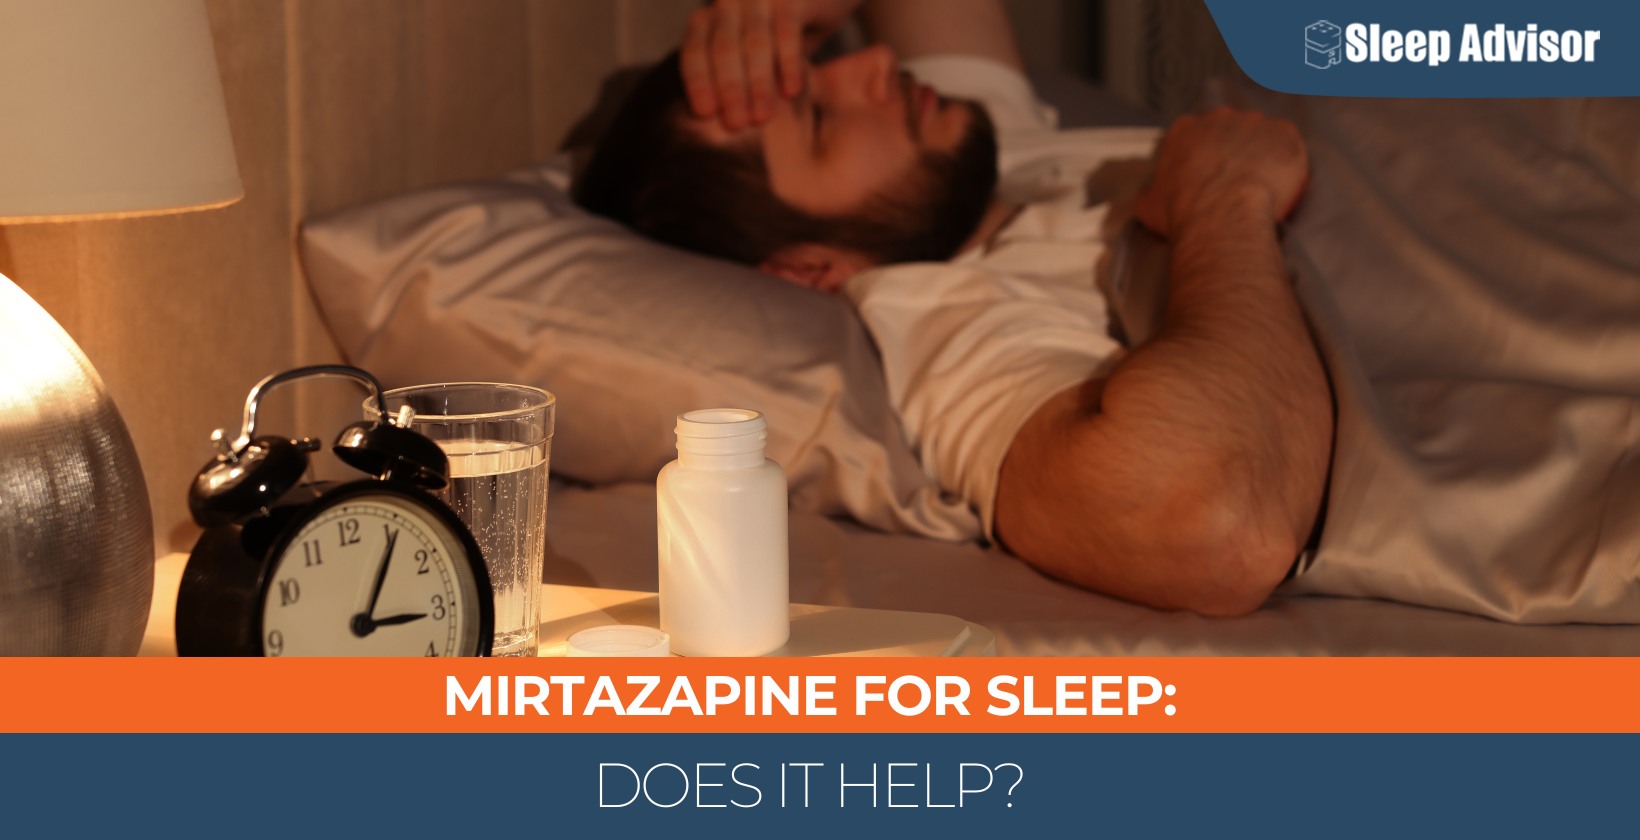 Mirtazapine for Sleep: Does it Help?